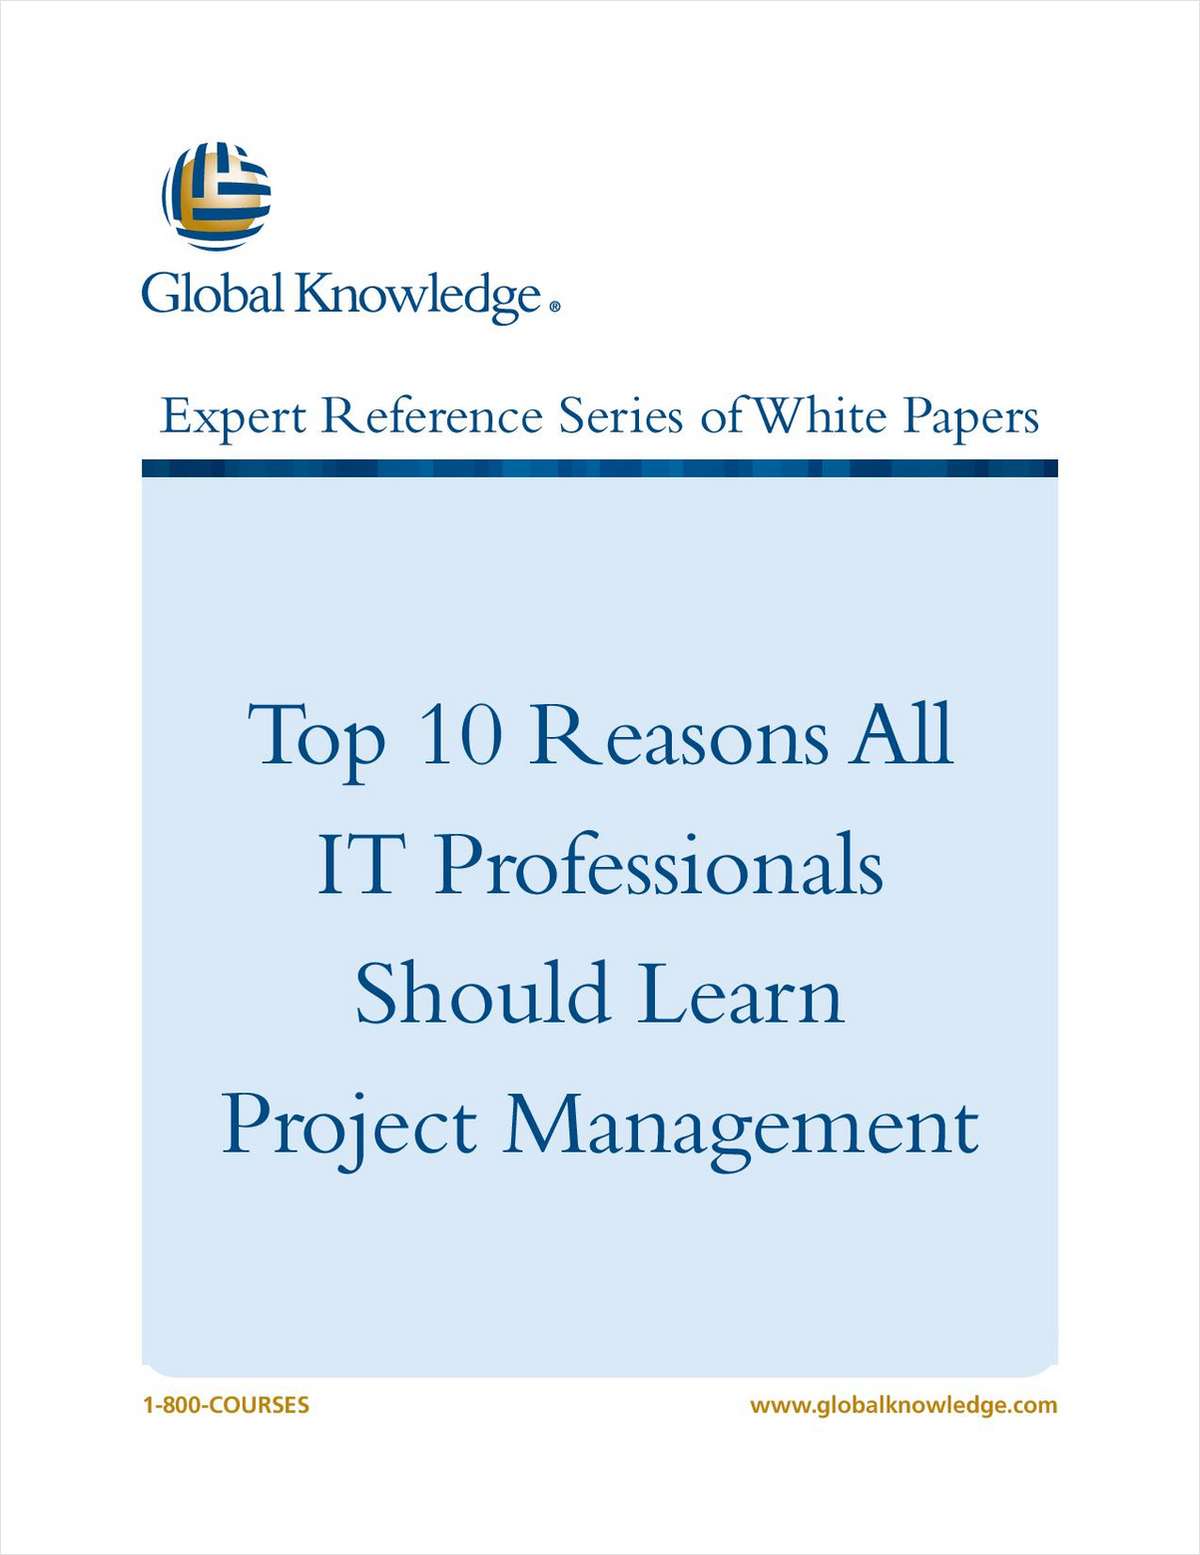 The Top 10 Reasons all IT Professionals Should Learn Project Management